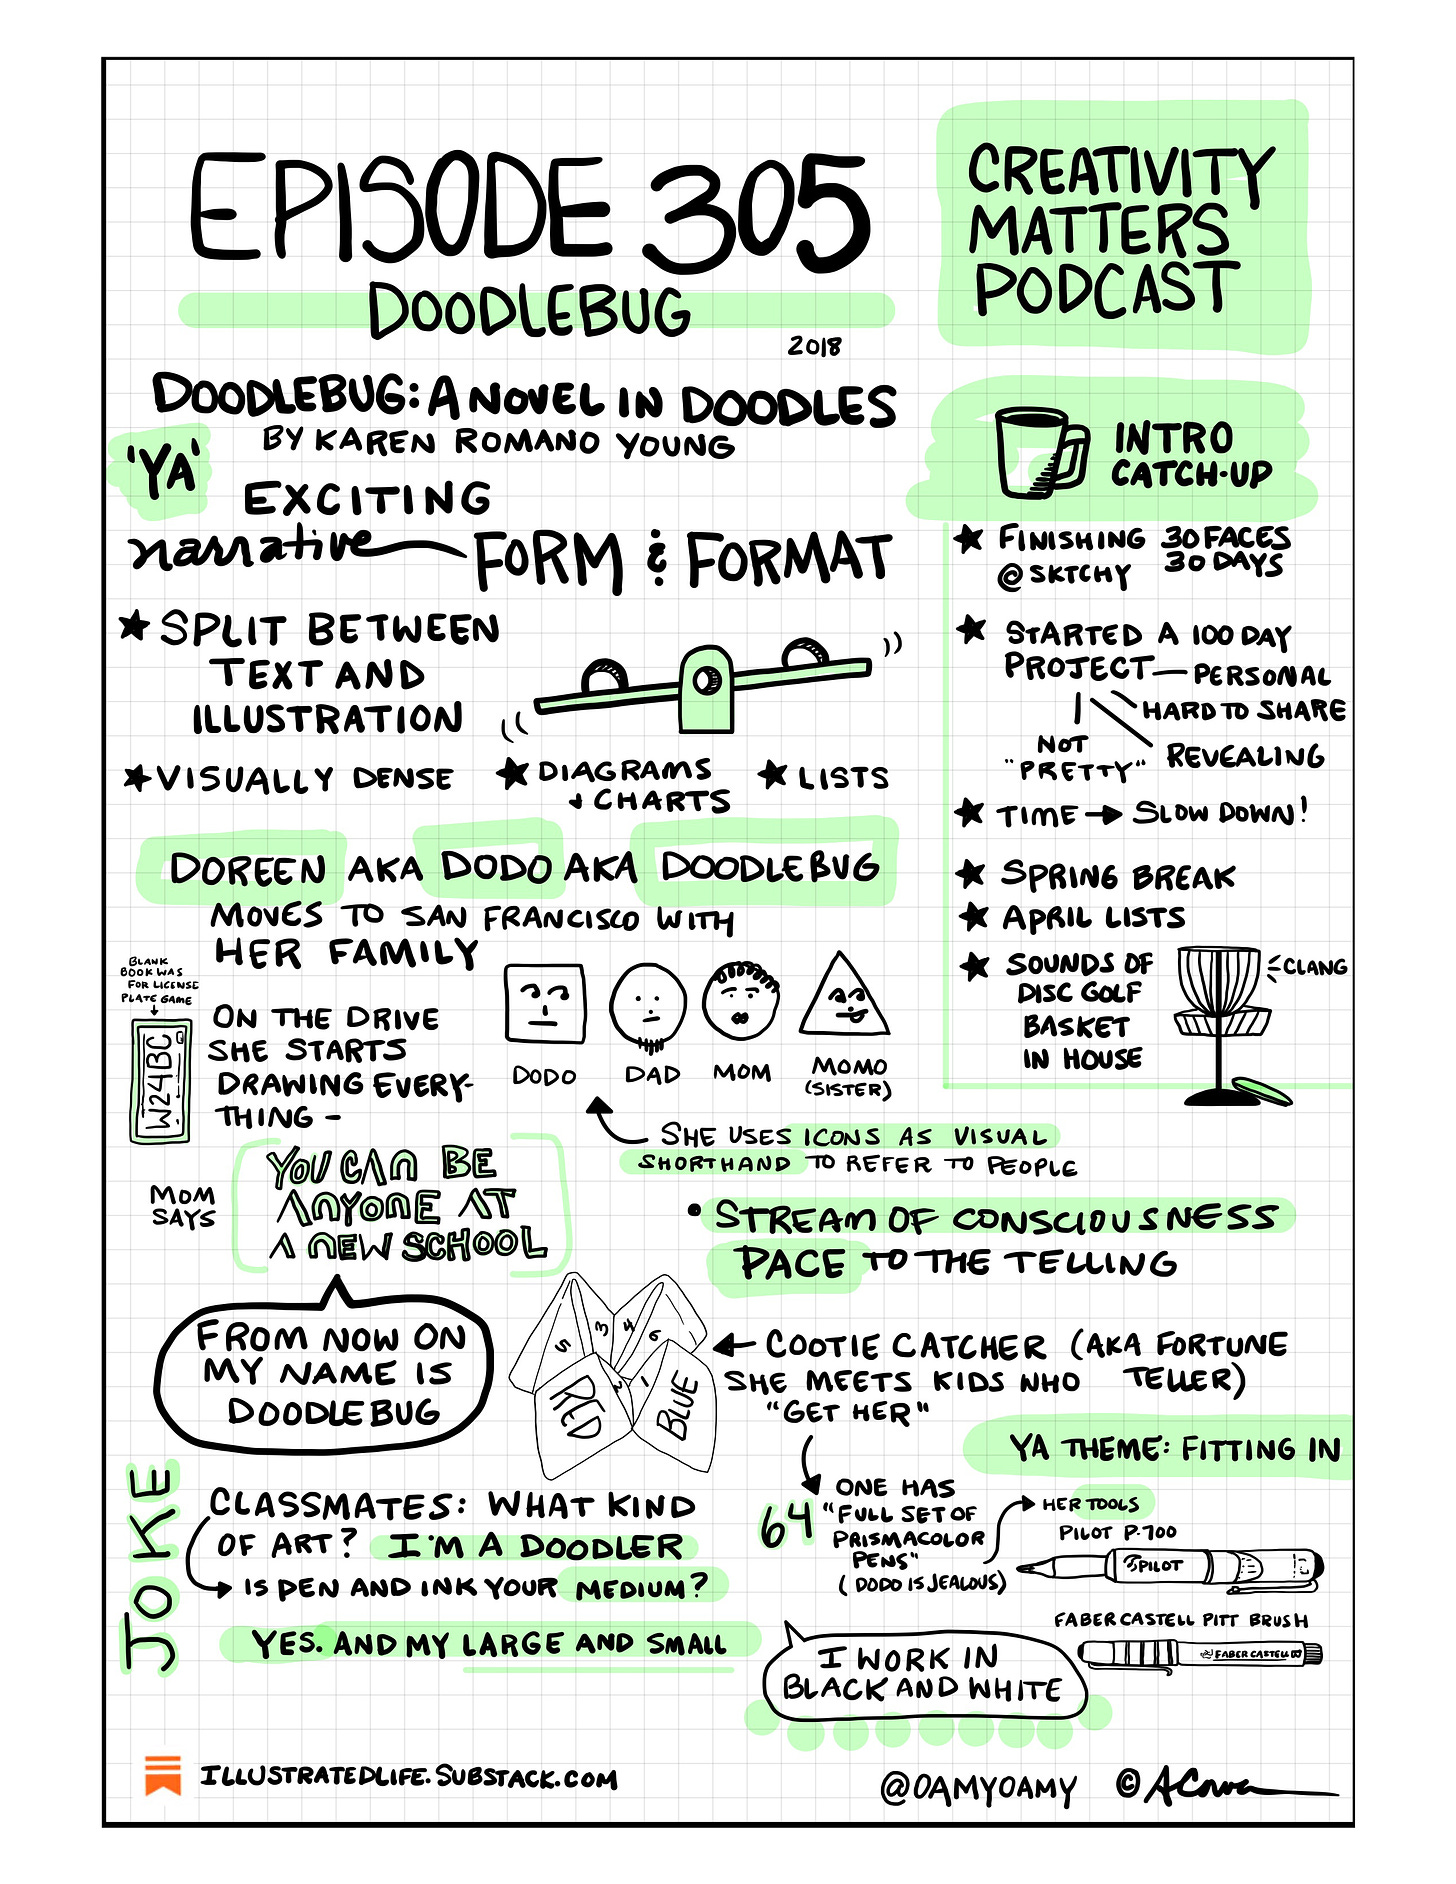 Sketch notes for Episode 305 of the Creativity Matters Podcast